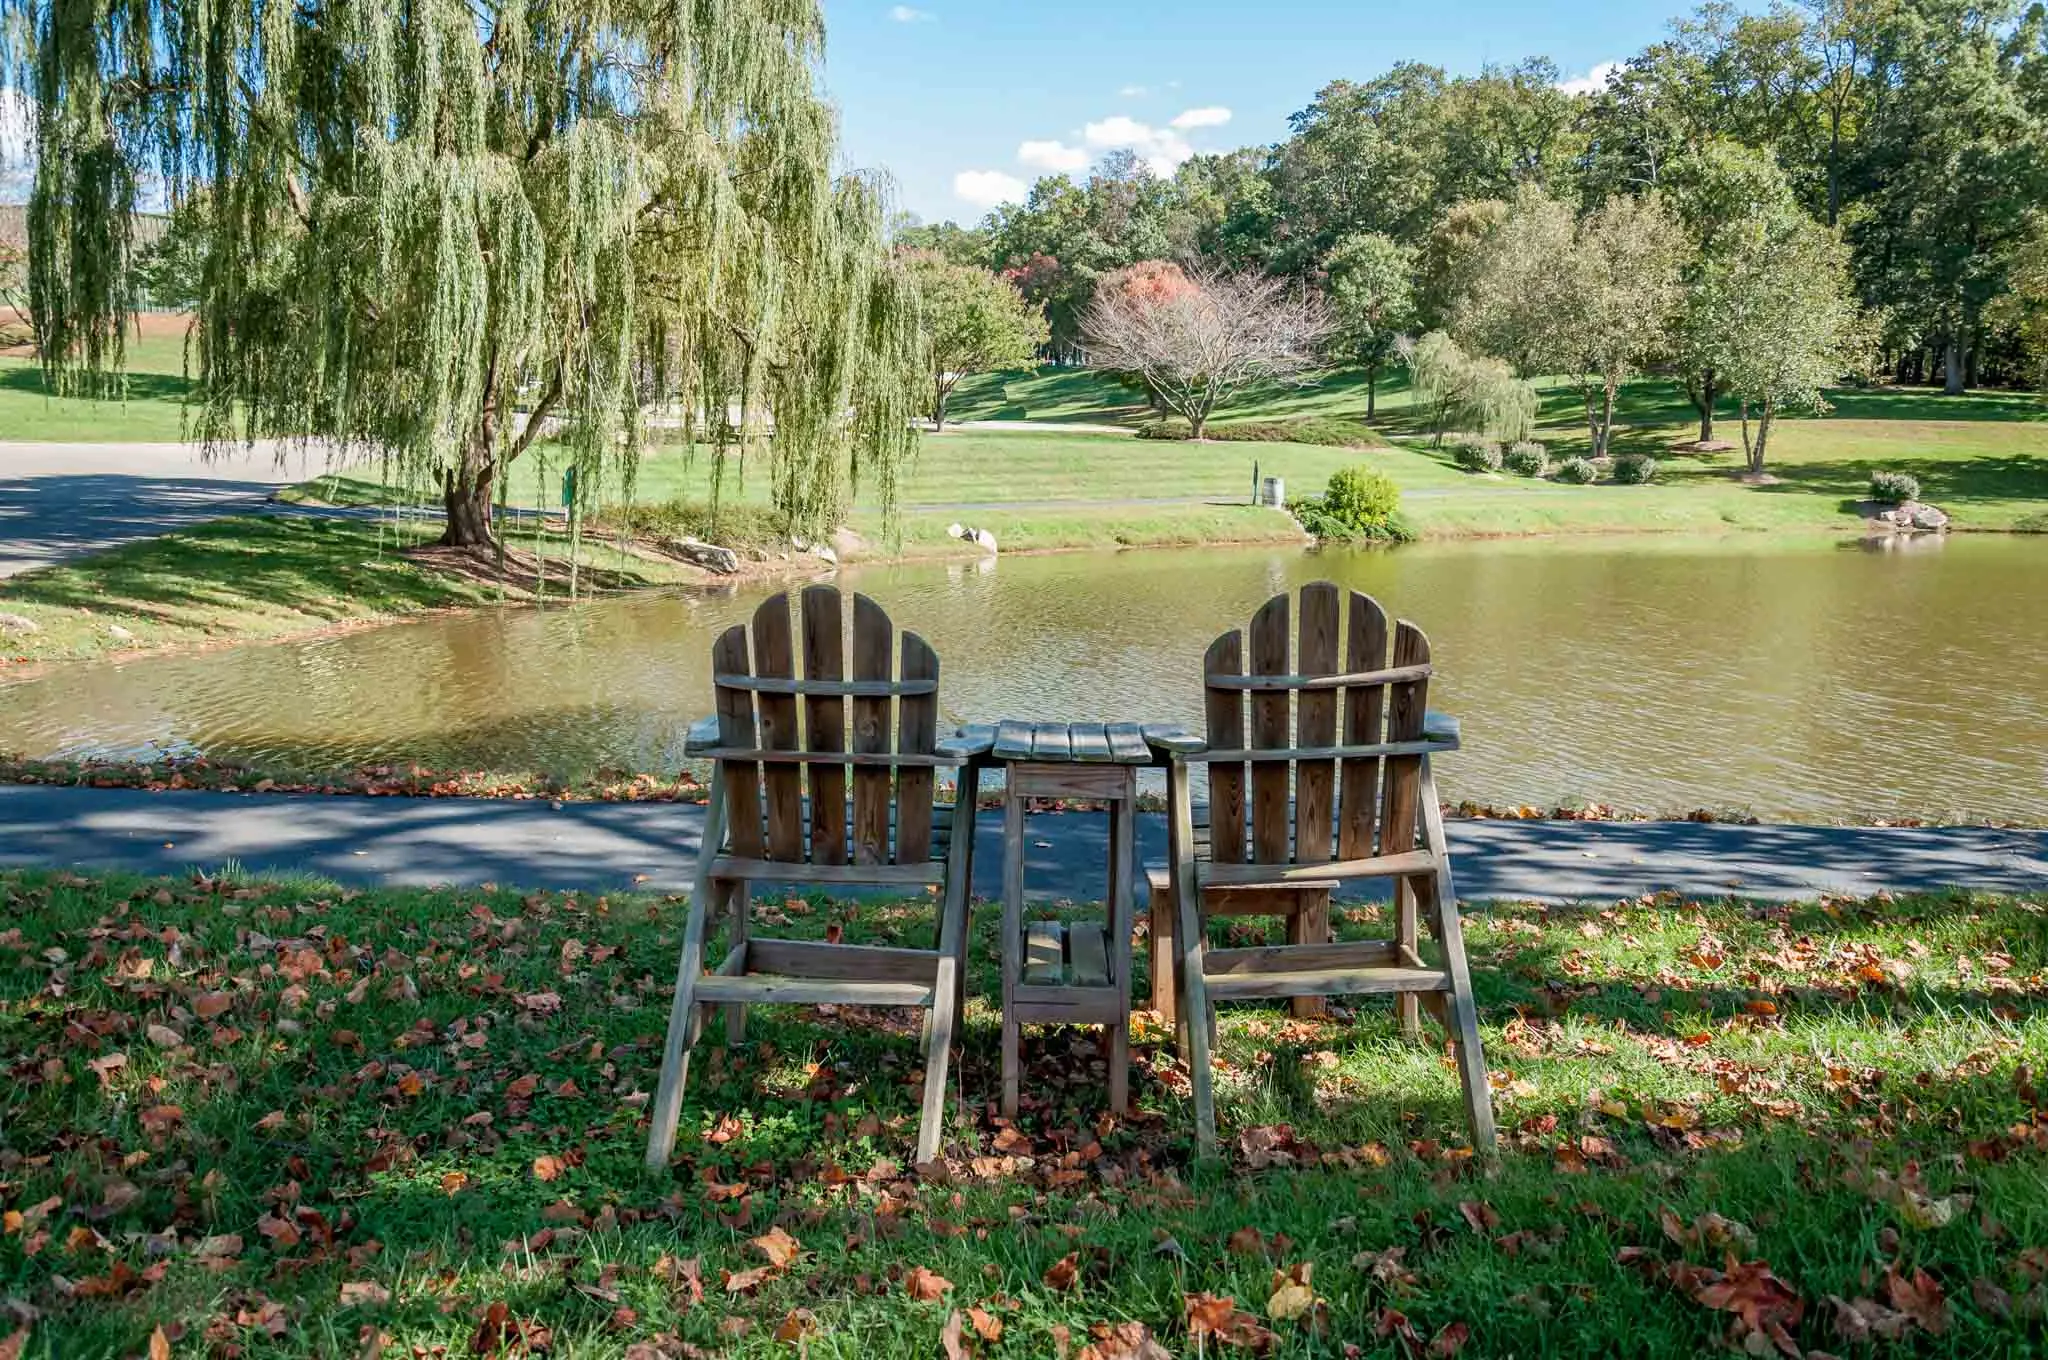 Chairs beside a pond